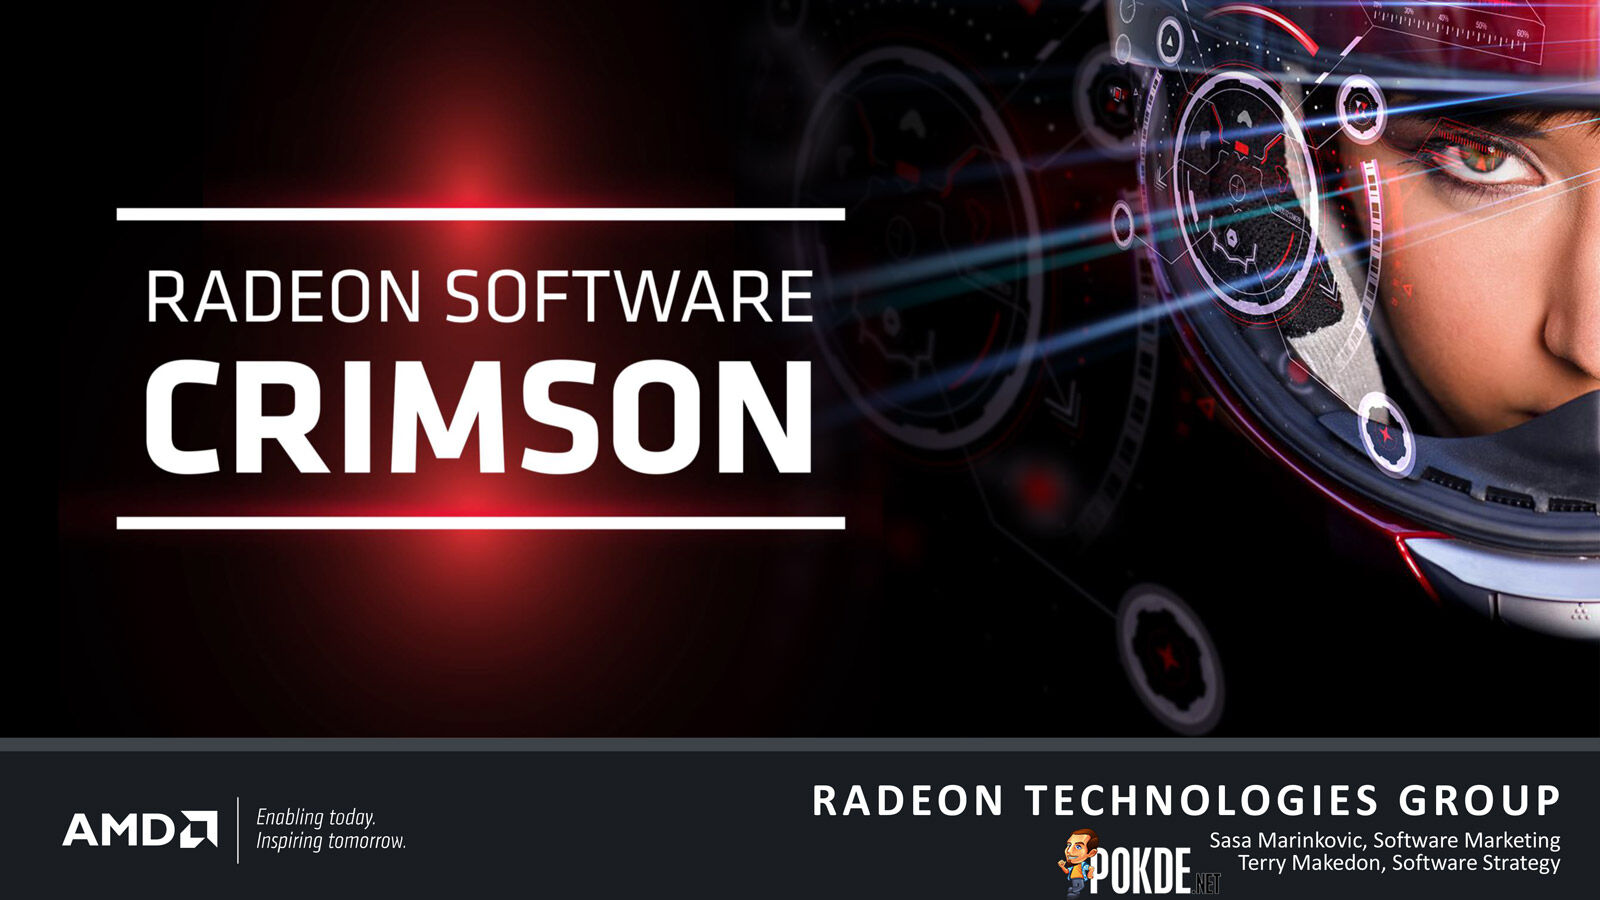 Radeon Technologies Group launched their first product today — Radeon Software Crimson Edition 35